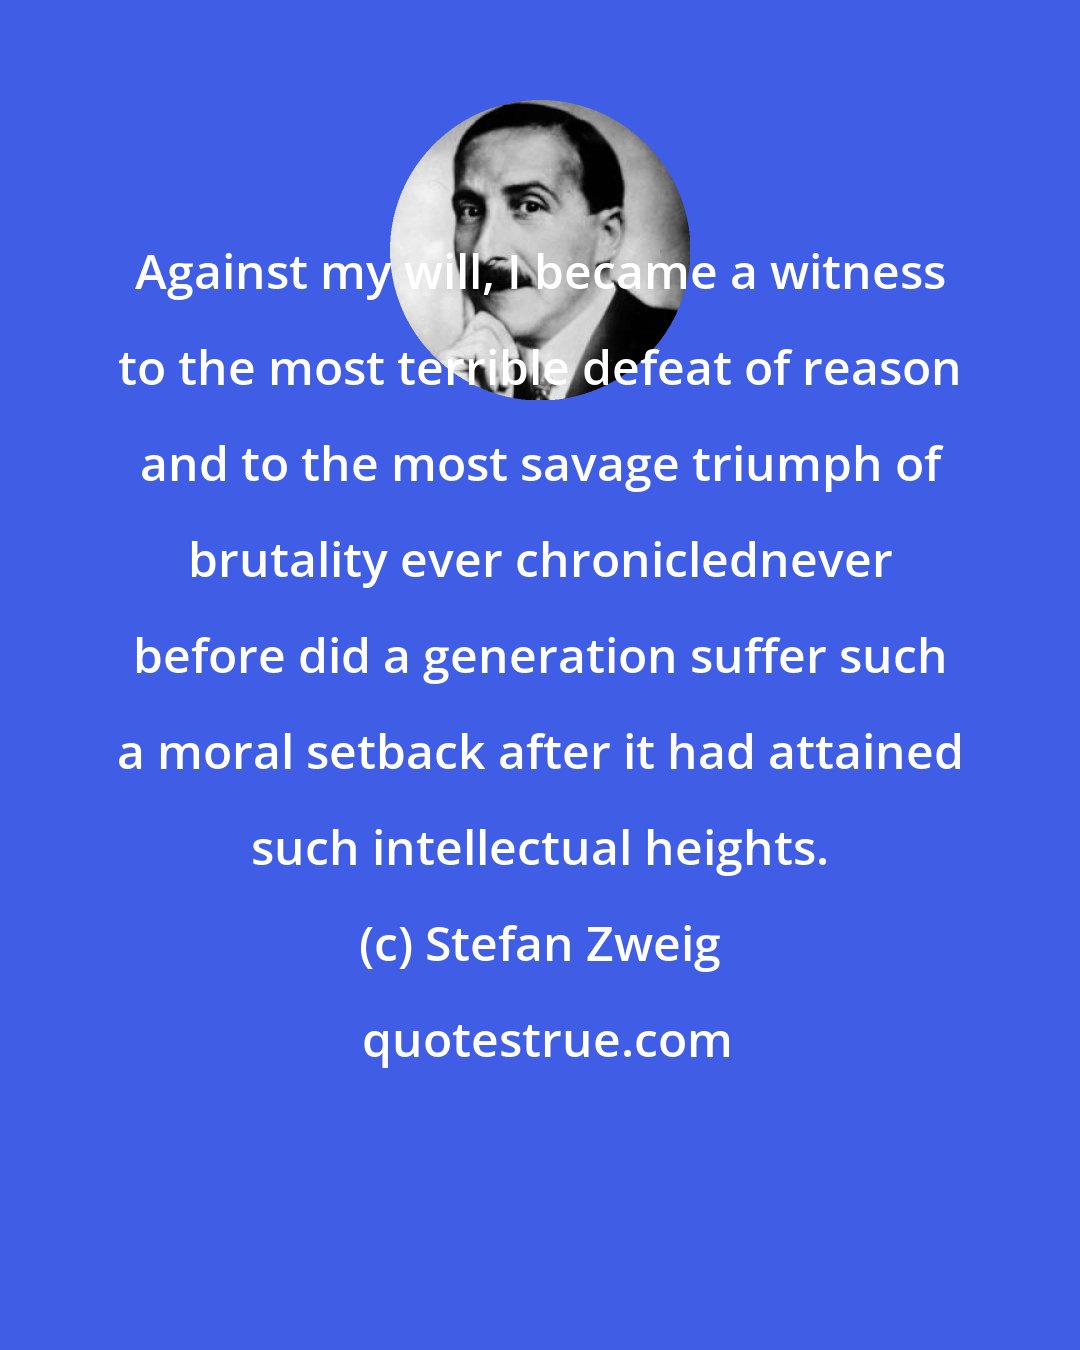 Stefan Zweig: Against my will, I became a witness to the most terrible defeat of reason and to the most savage triumph of brutality ever chroniclednever before did a generation suffer such a moral setback after it had attained such intellectual heights.